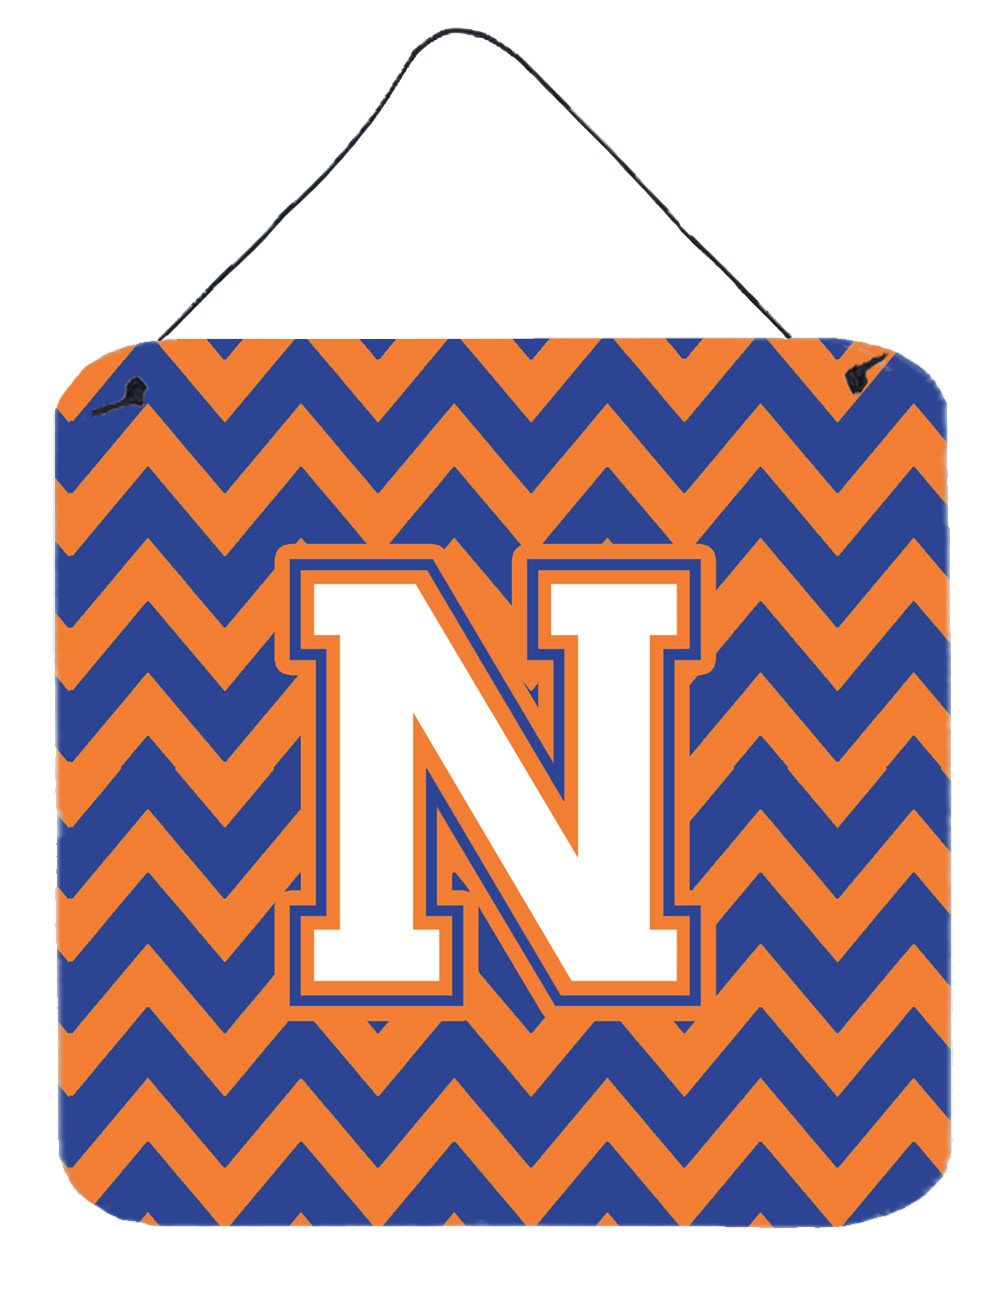 Letter N Chevron Blue and Orange #3 Wall or Door Hanging Prints CJ1060-NDS66 by Caroline's Treasures